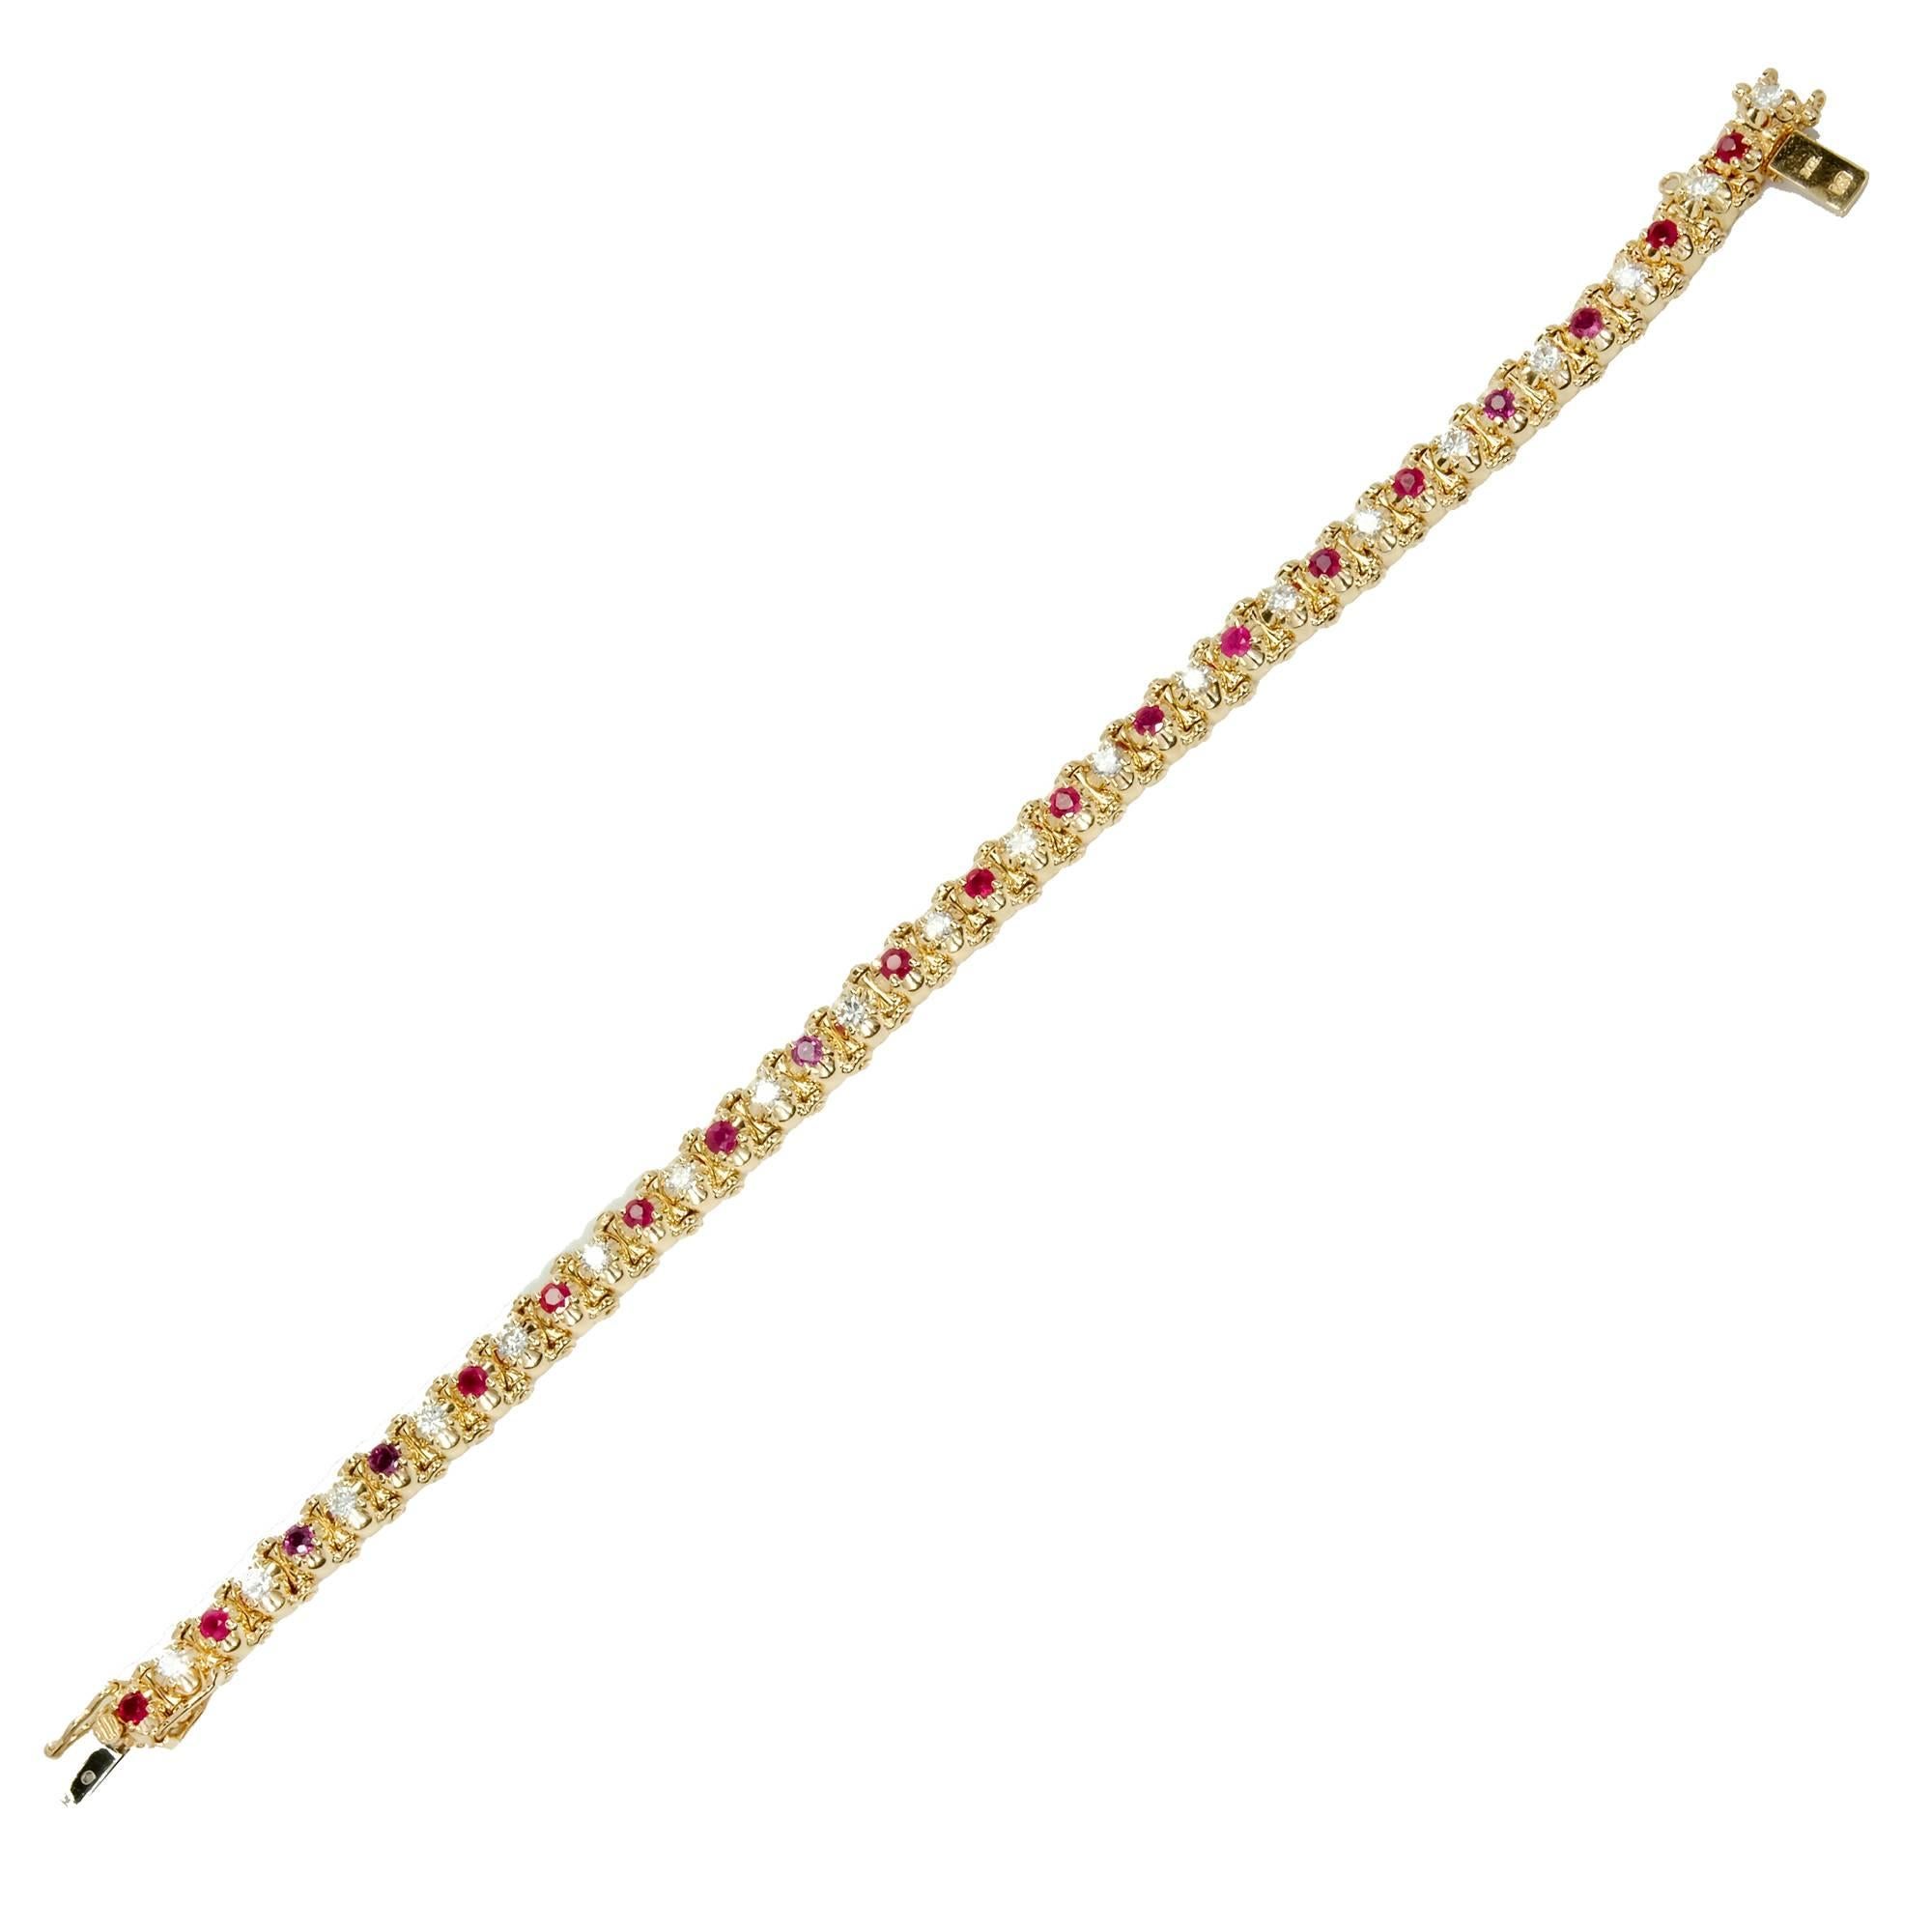 Round Ruby and diamond full cut 14k yellow gold bracelet with double side lock catches and underside safety.

20 round Diamonds, approx. total weight 1.20cts, H – I, VS1 – SI1
20 round red Rubies, approx. total weight 2.00cts, SI, 2.5mm
14k yellow